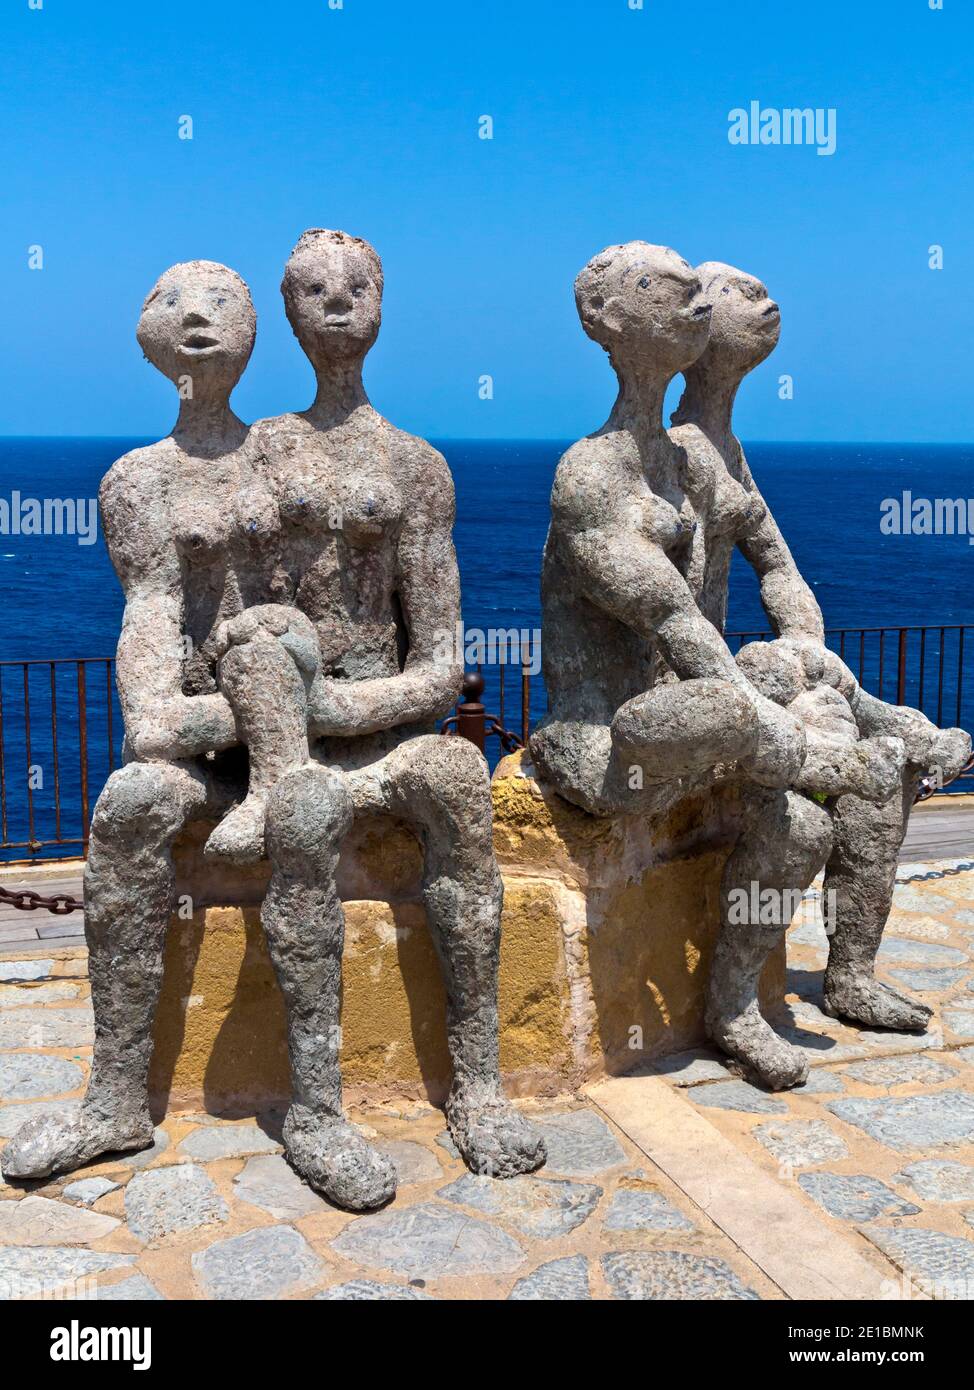 Sculptures of four figures on a cliff top at Port de Soller in Mallorca Spain Stock Photo